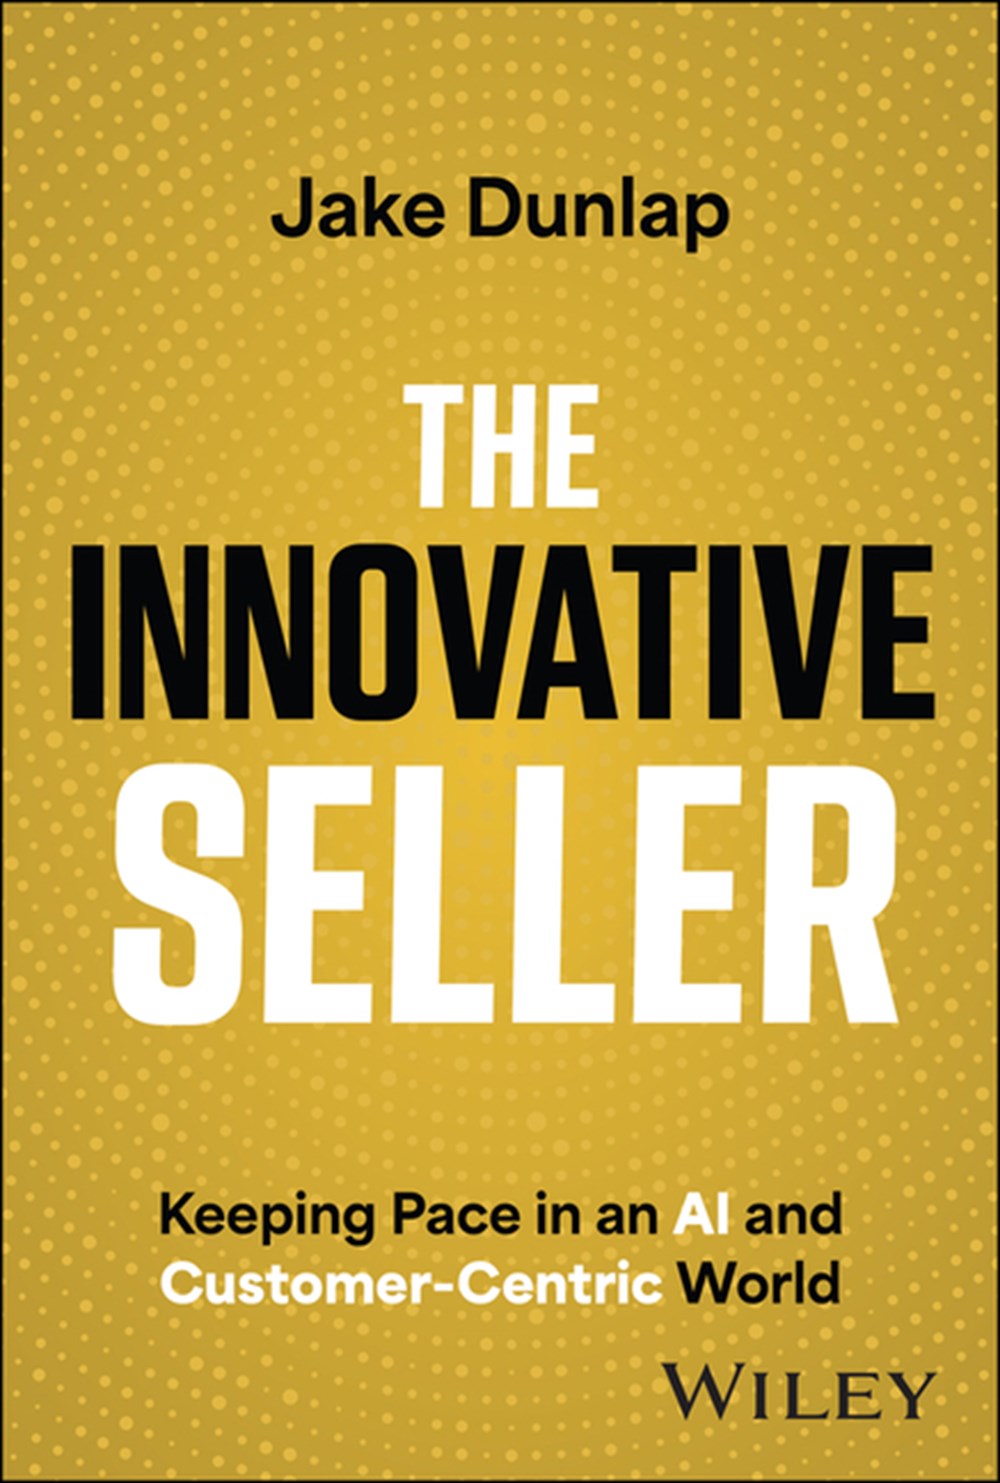 Innovative Seller: Keeping Pace in an AI and Customer-Centric World